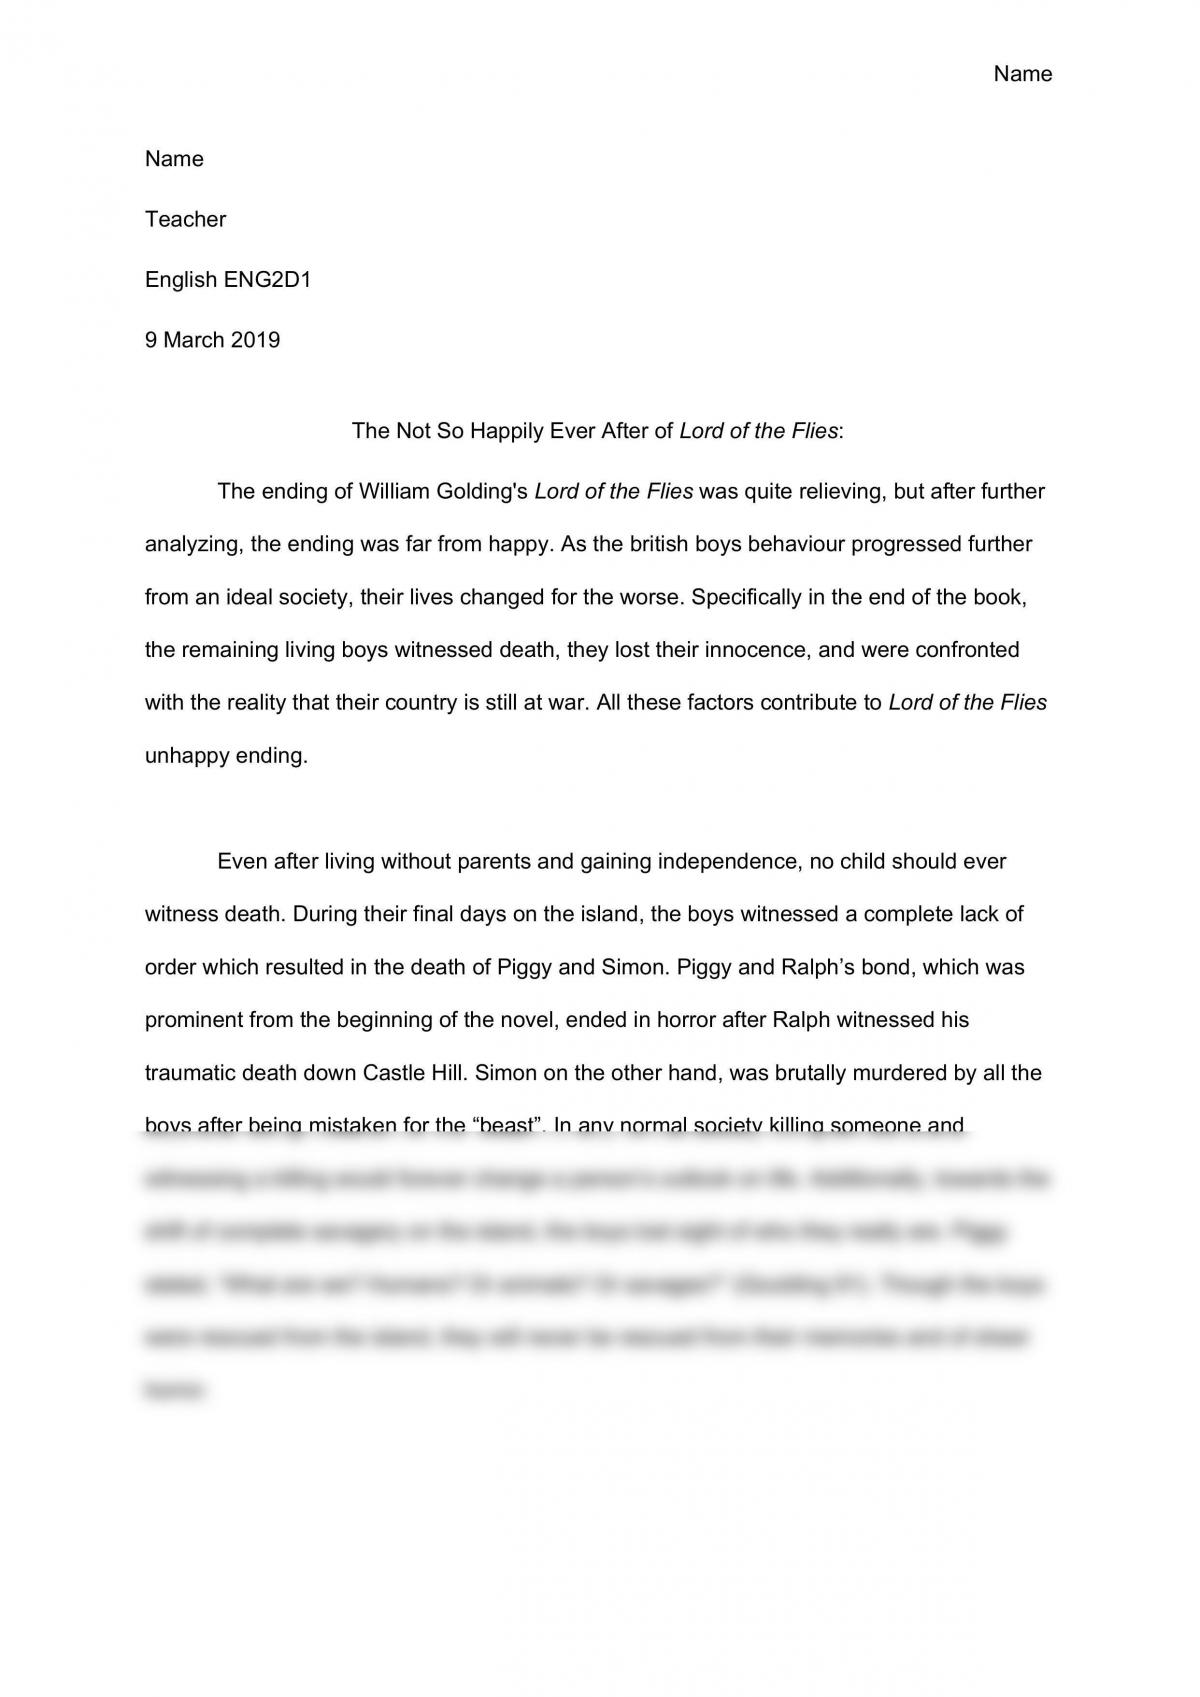 lord of the flies english essay